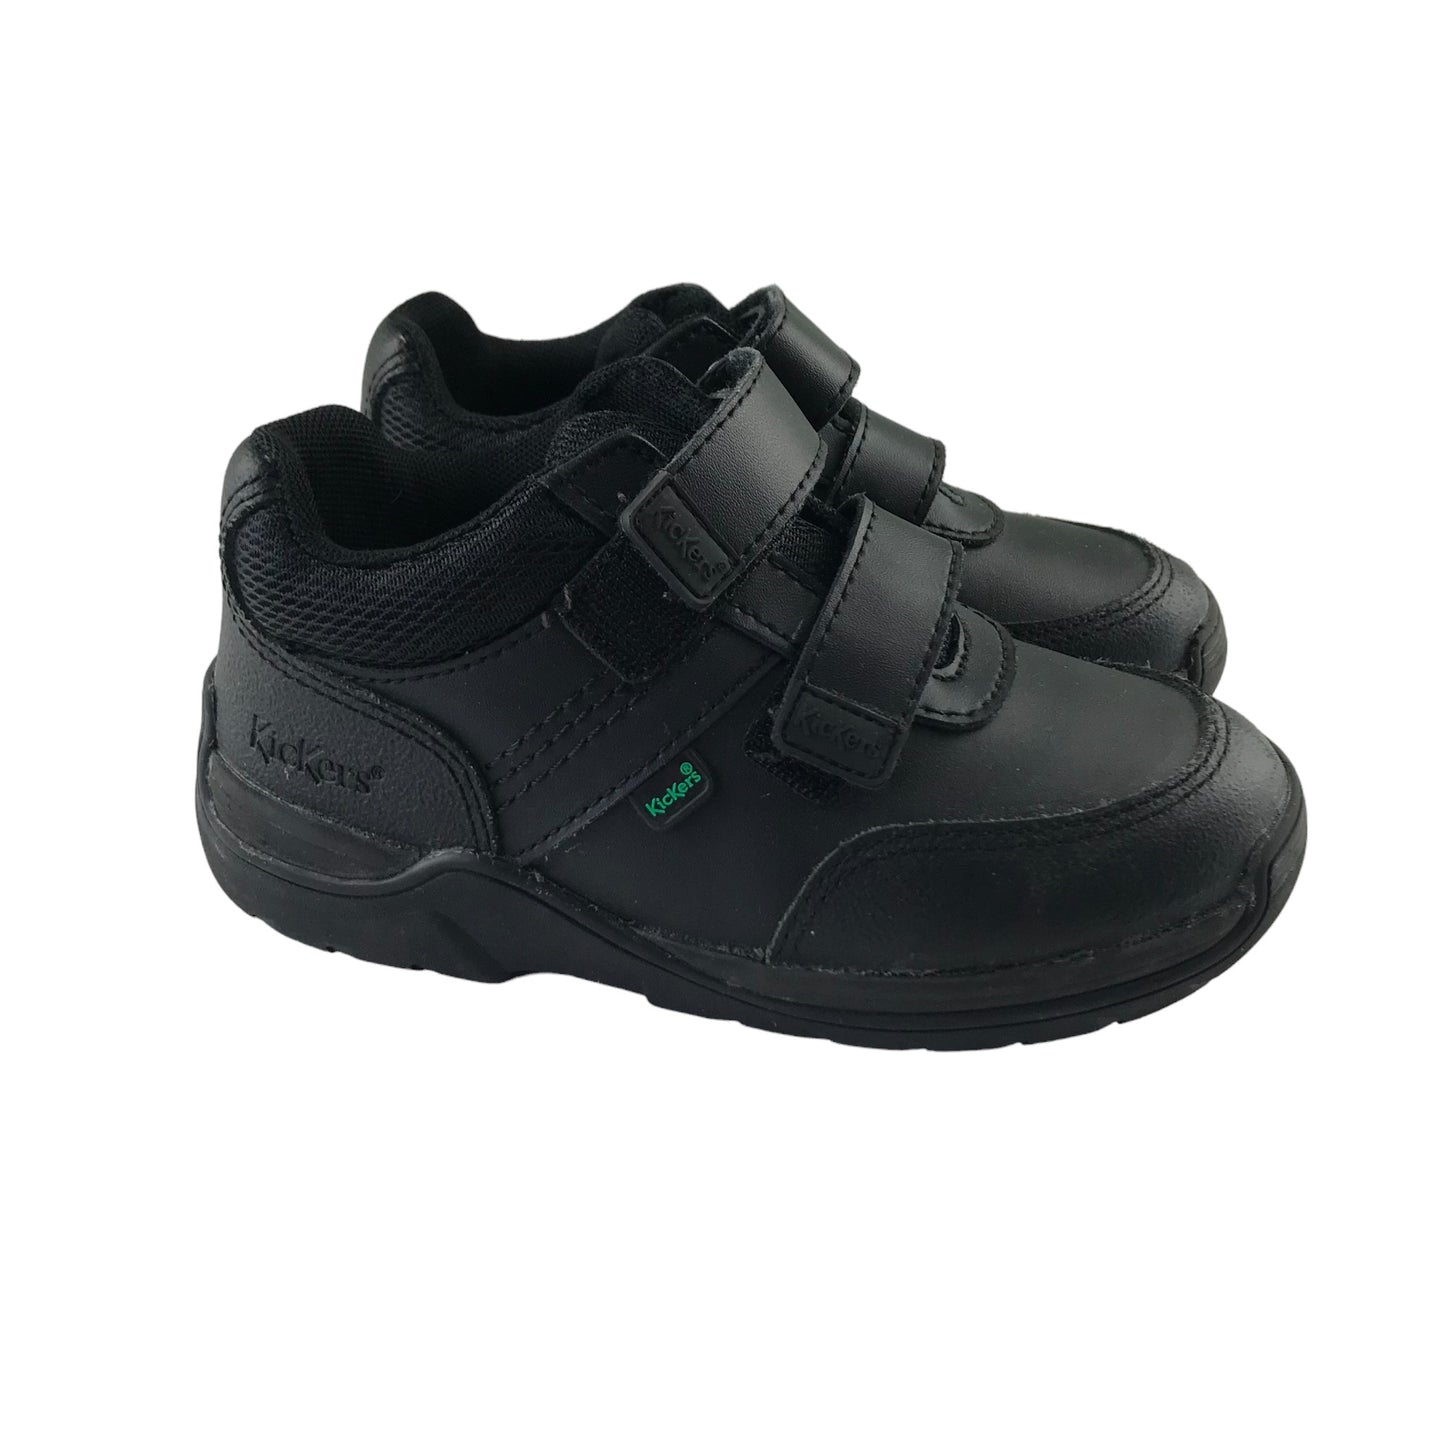 KicKers Trainers Shoe Size 10 Junior Black Leather-style School Shoes with Straps